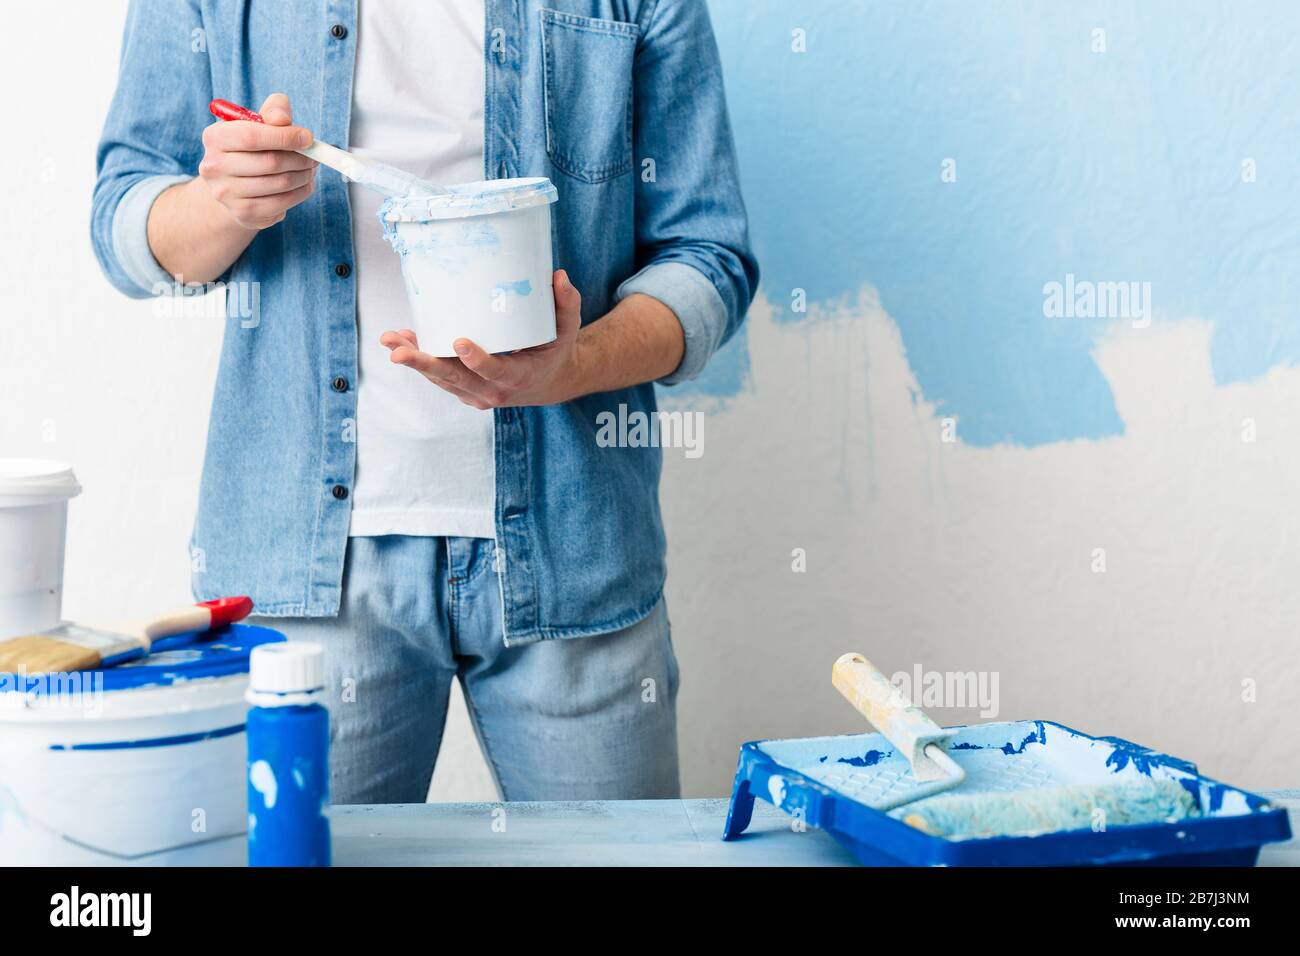 Homemade repairs concept. Guy mixes paint in bucket Stock Photo